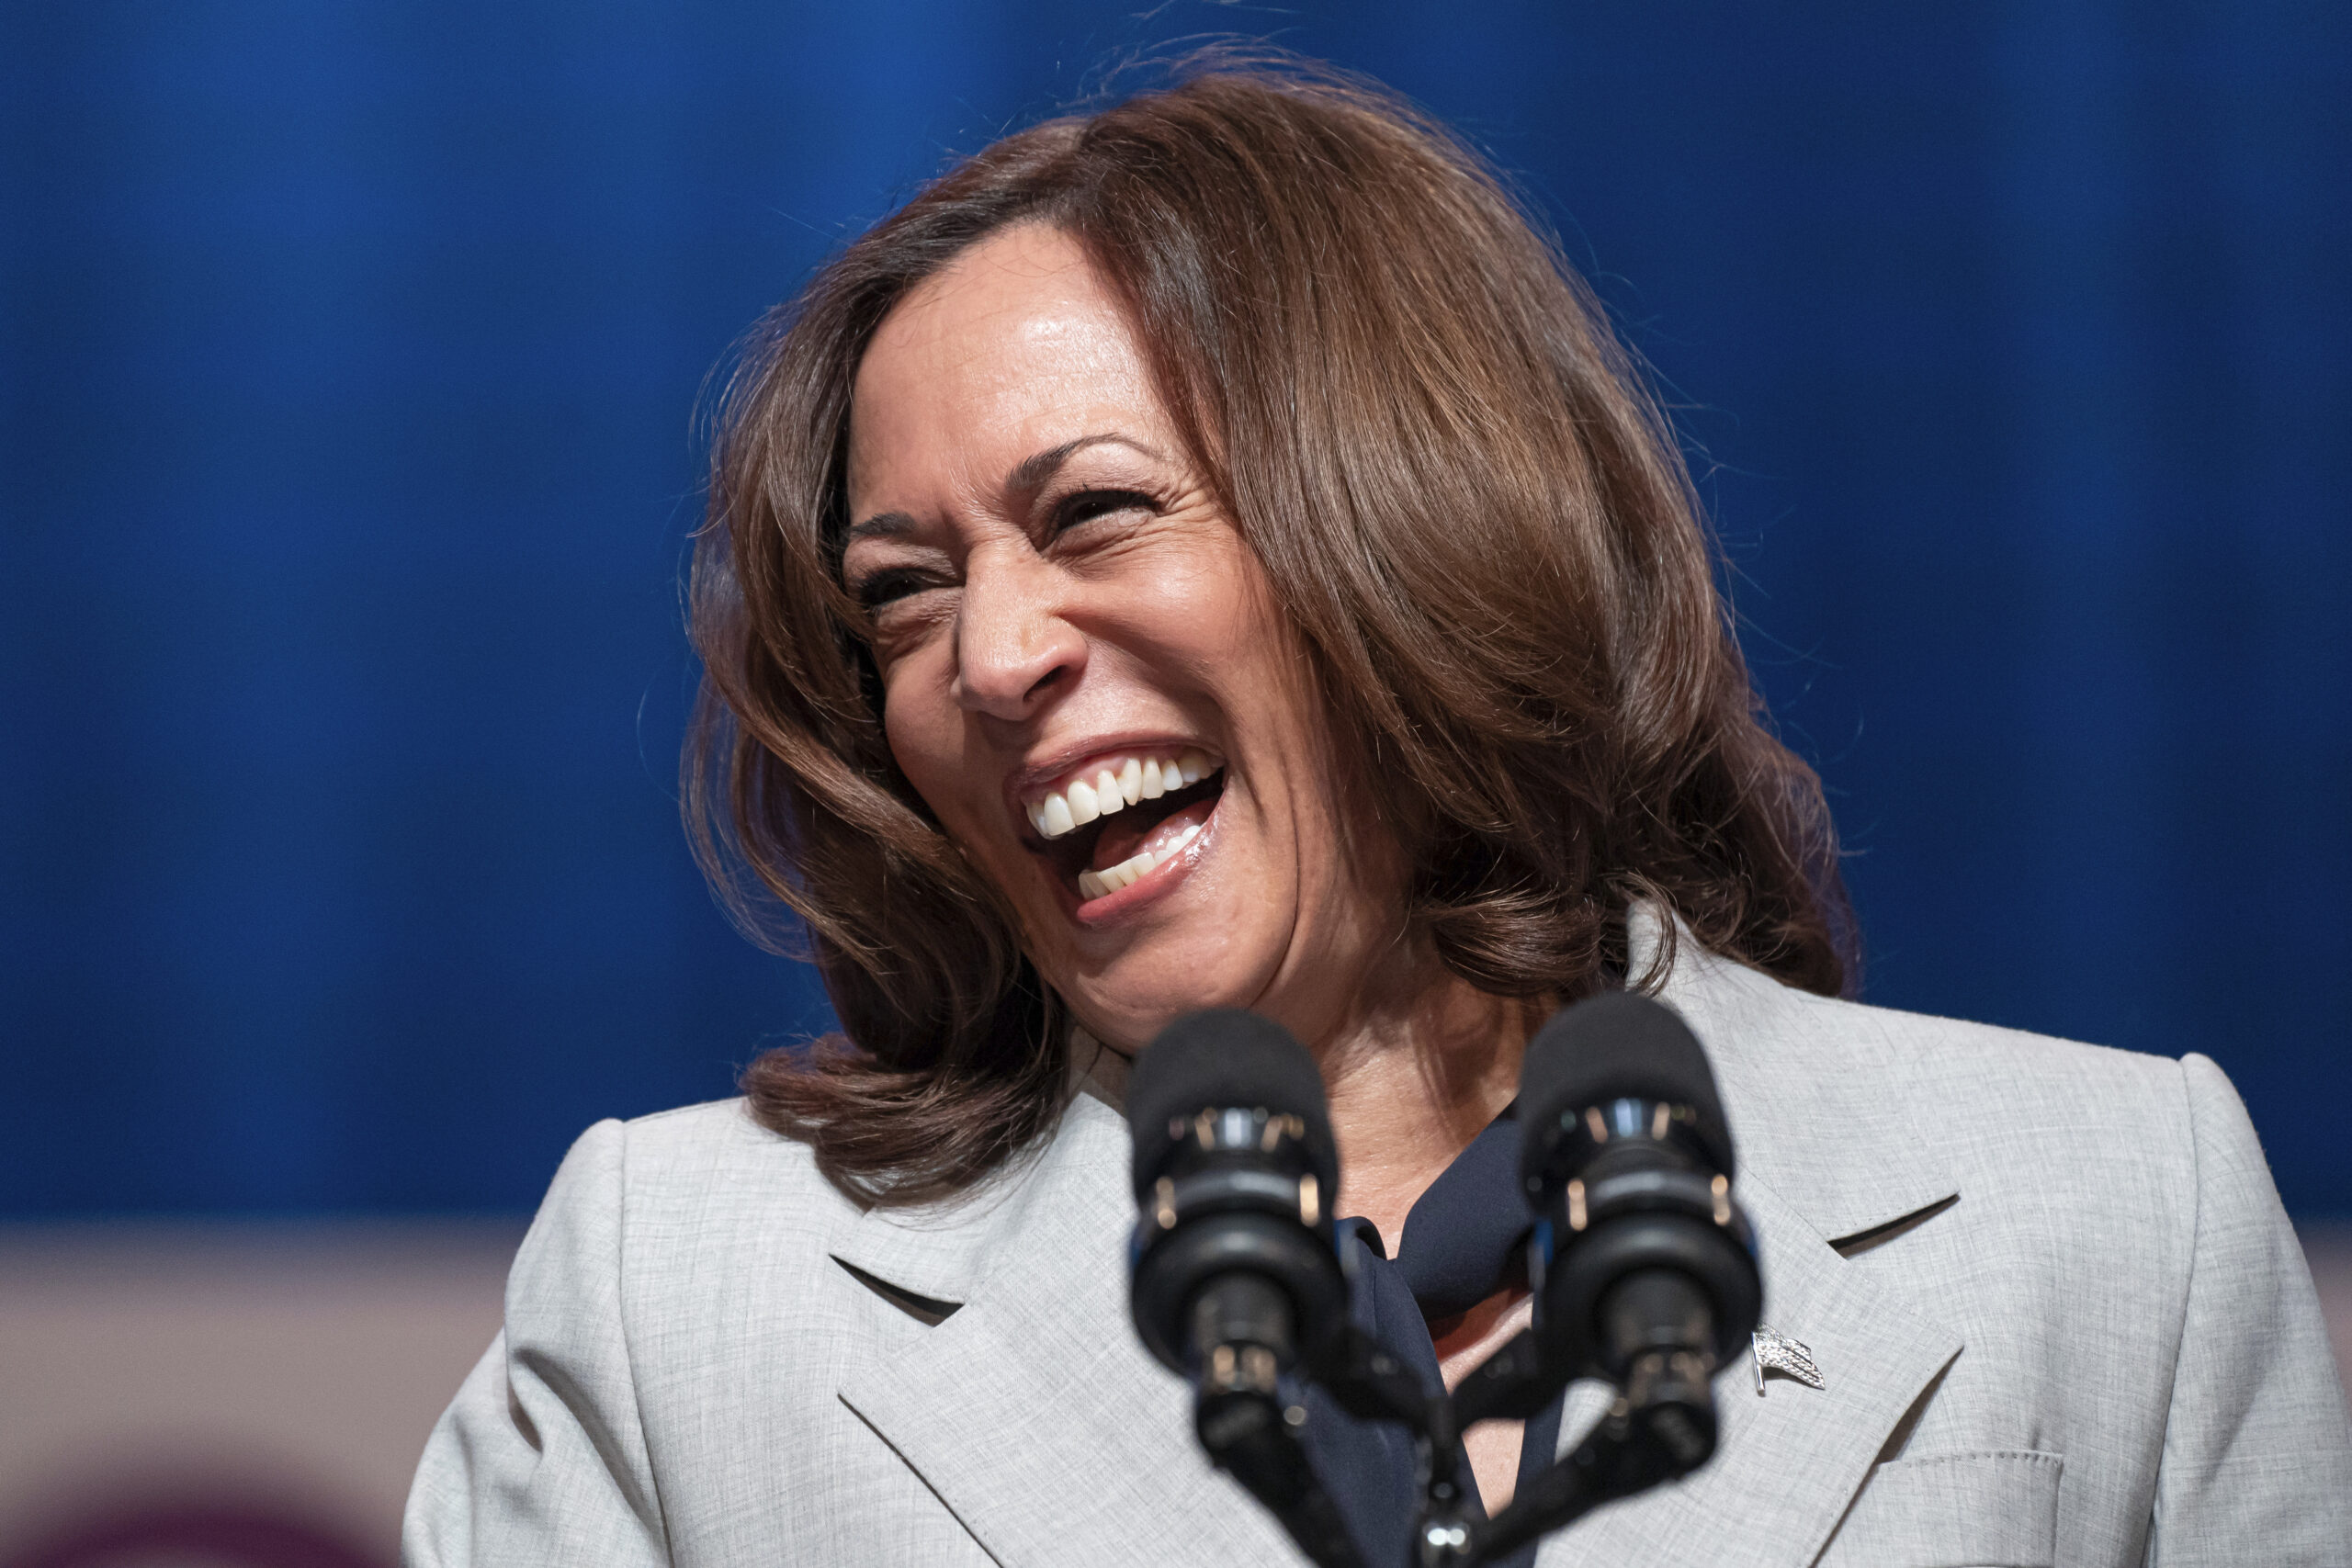 “Kamala Harris Takes the Reins, Juggles Hot-Button Issues with Joe Biden in Tow